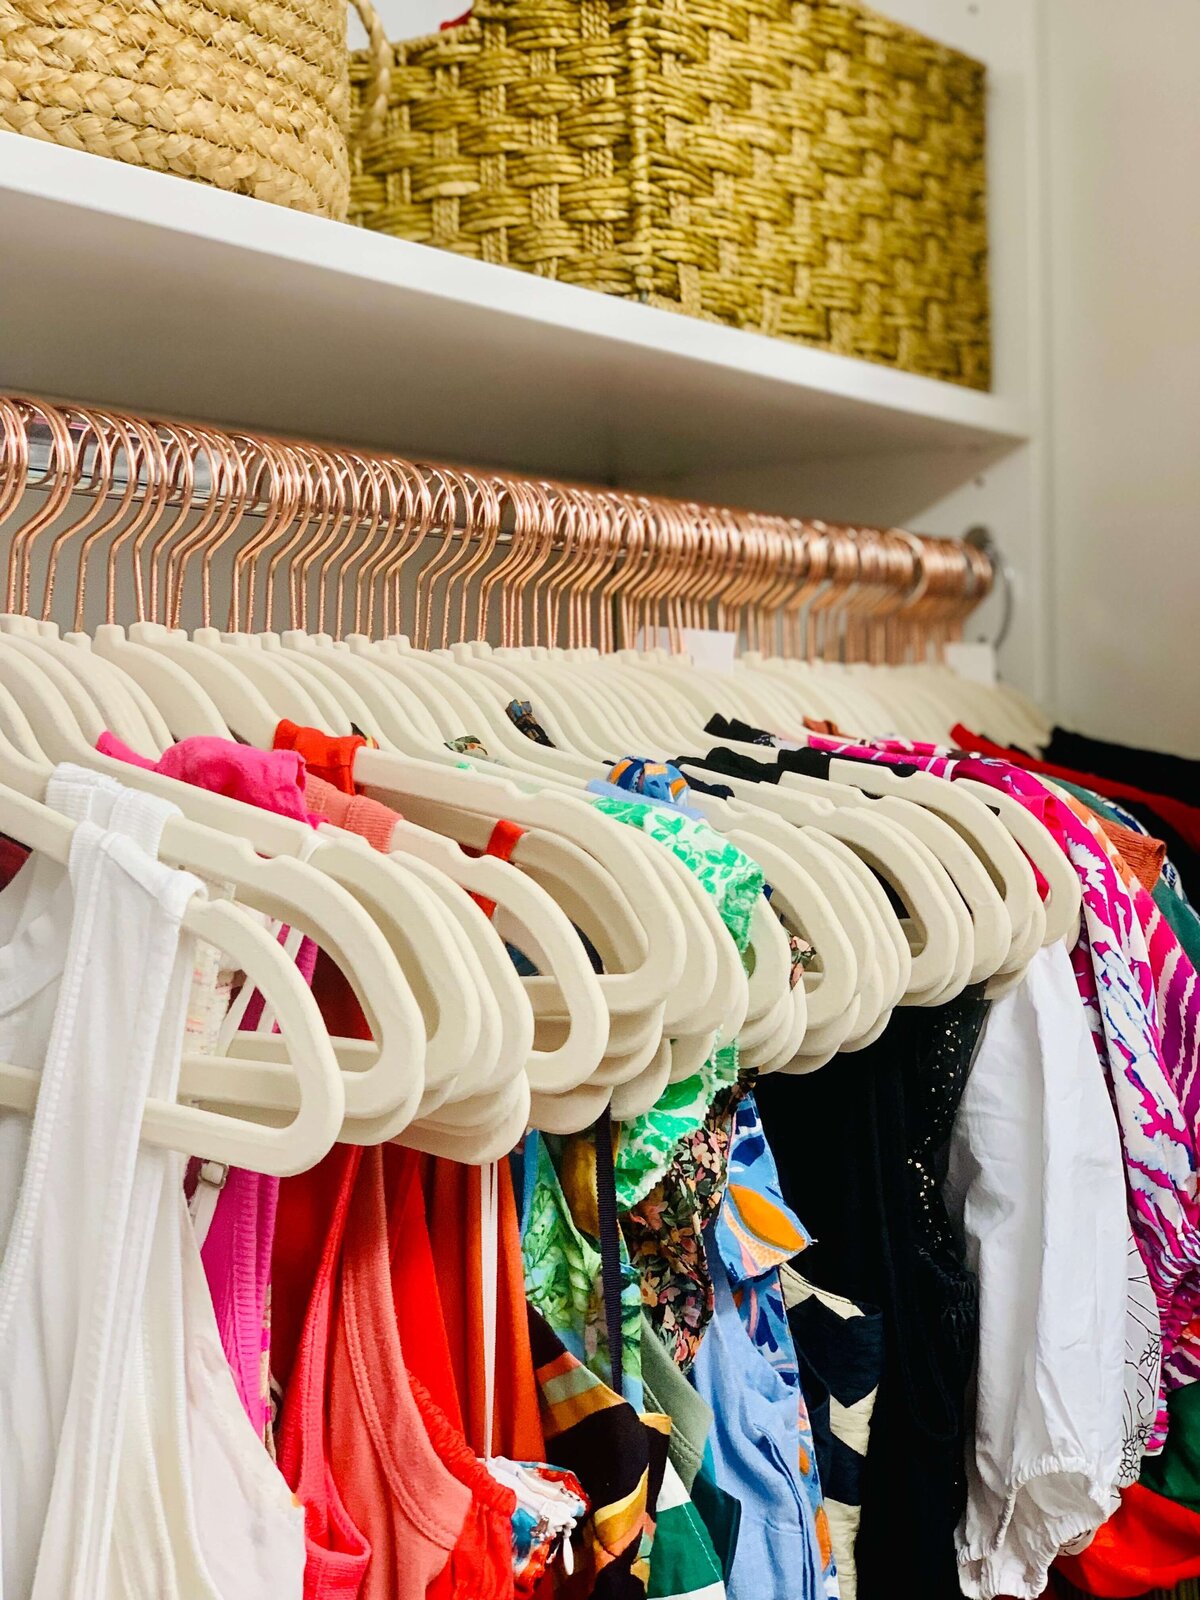 Shelving Systems for Closets